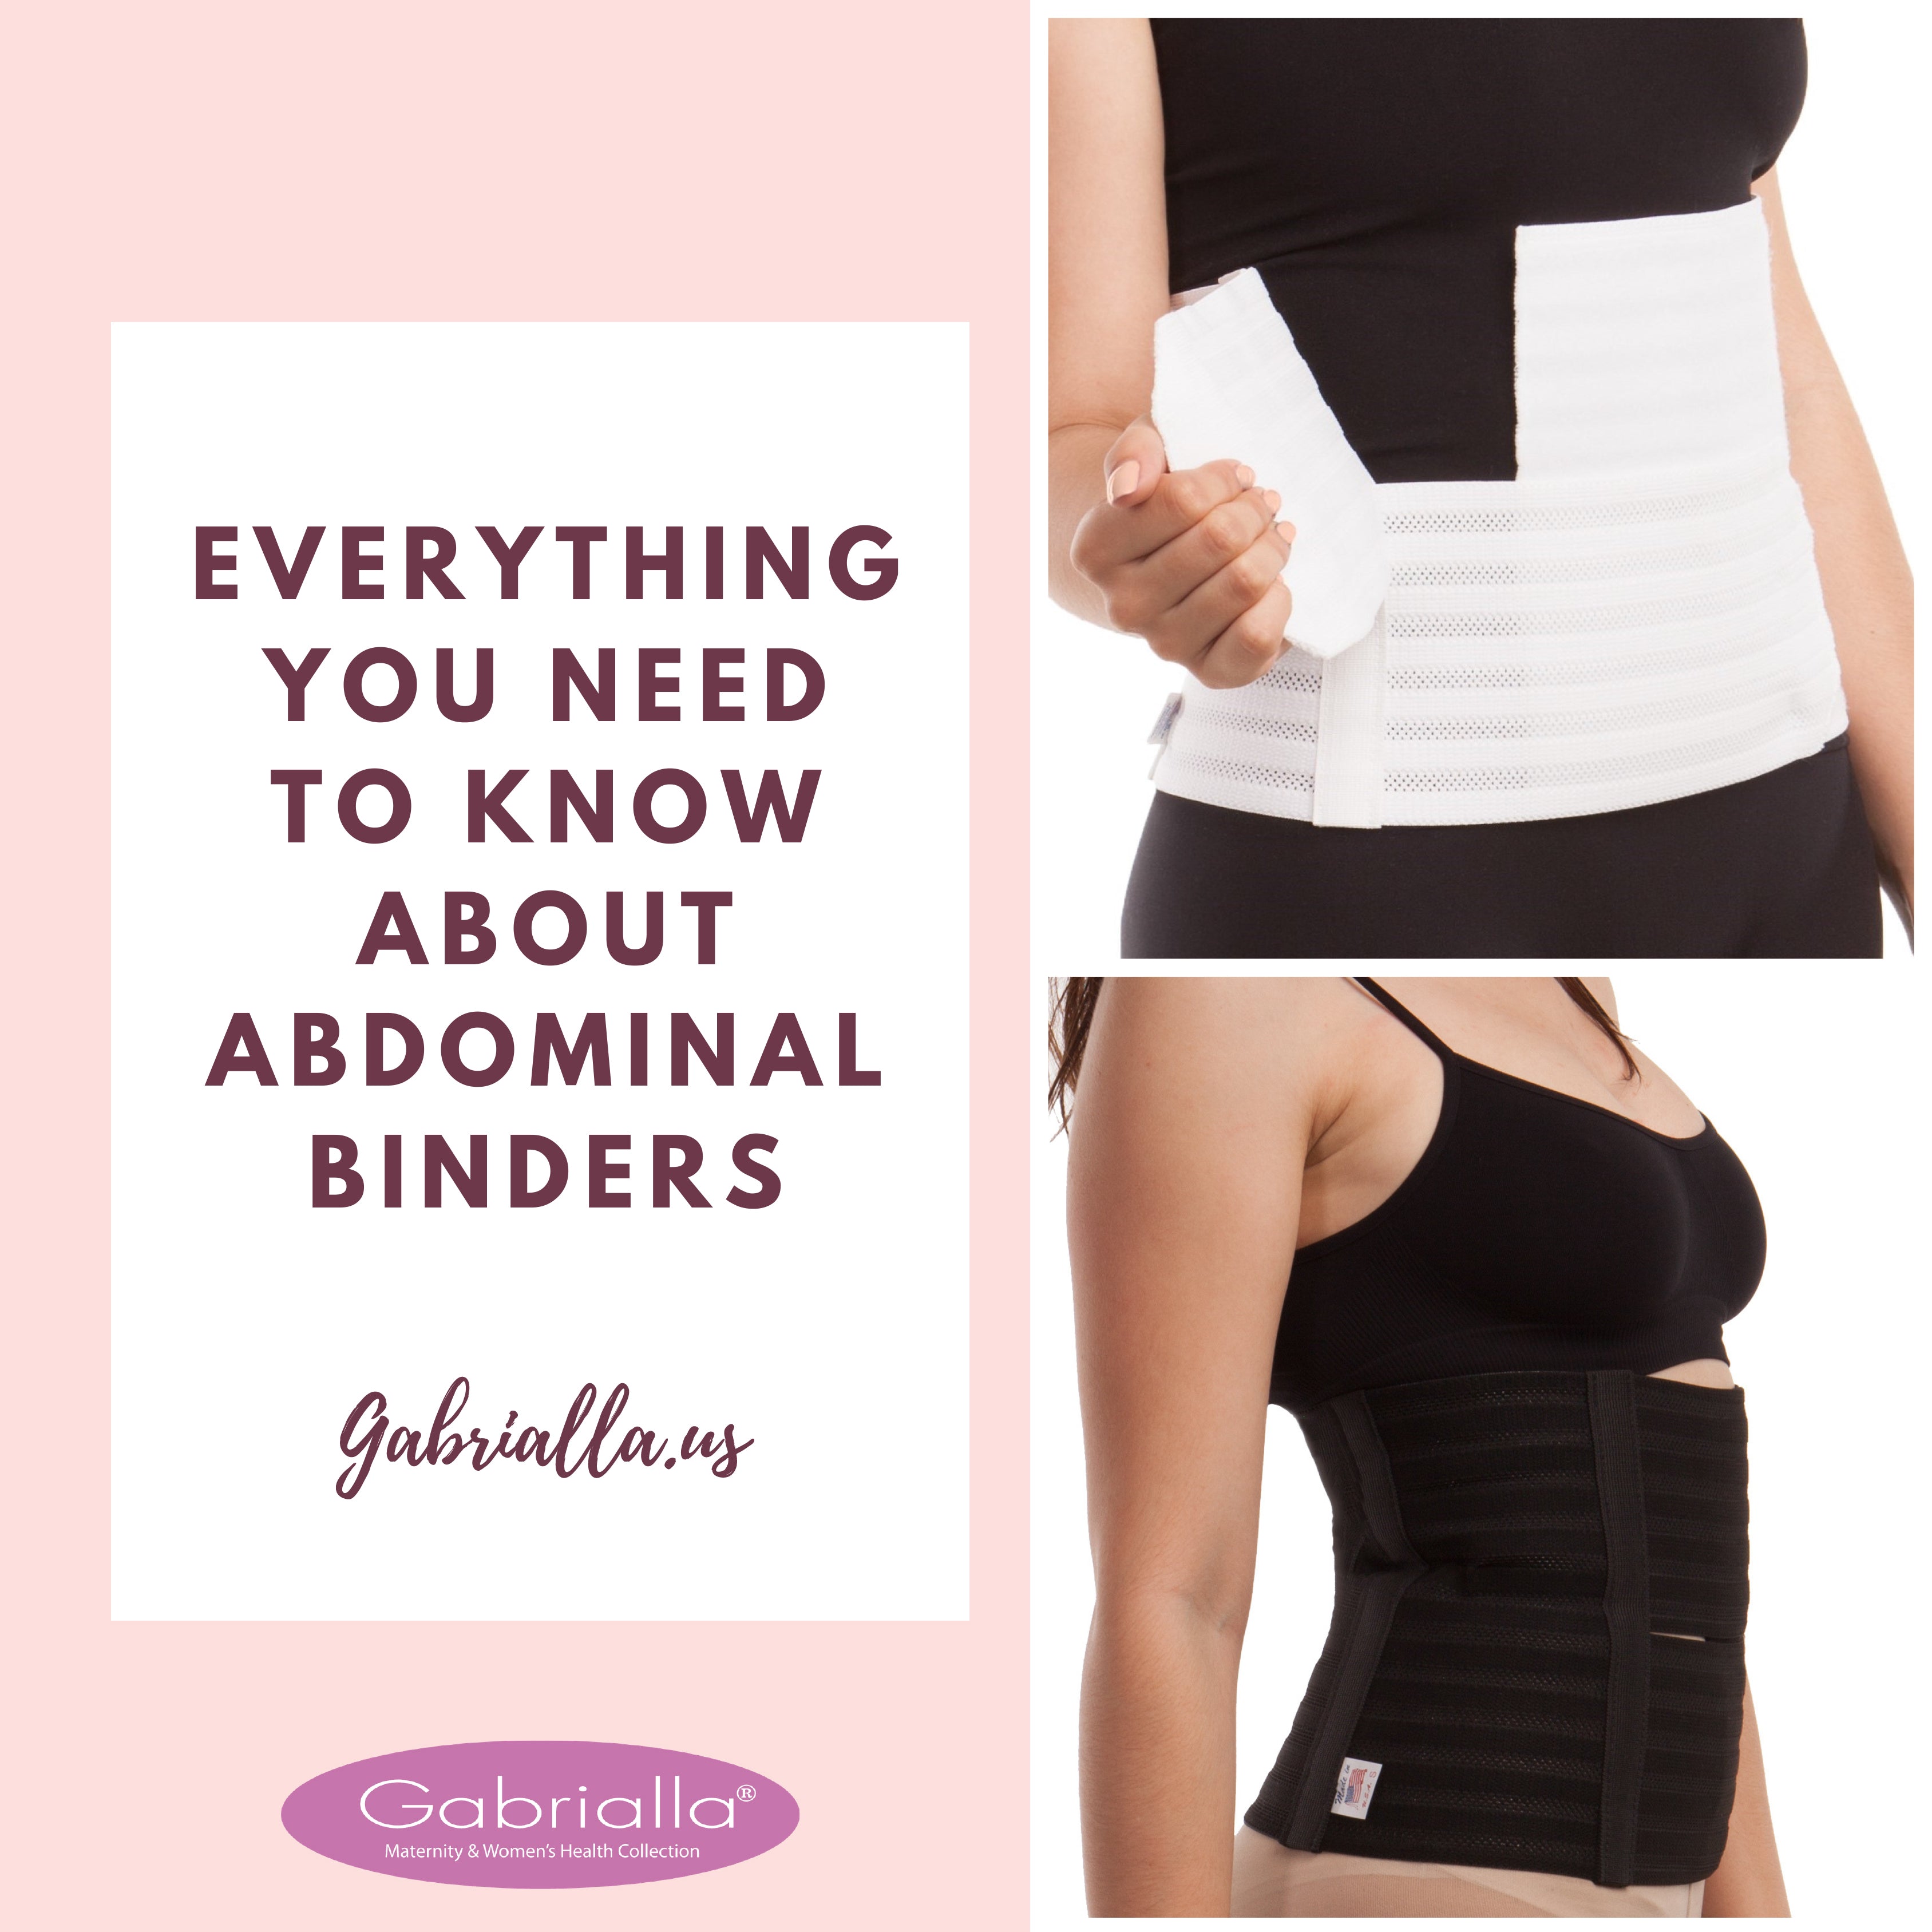 The Use and Benefits of an Abdominal Binder